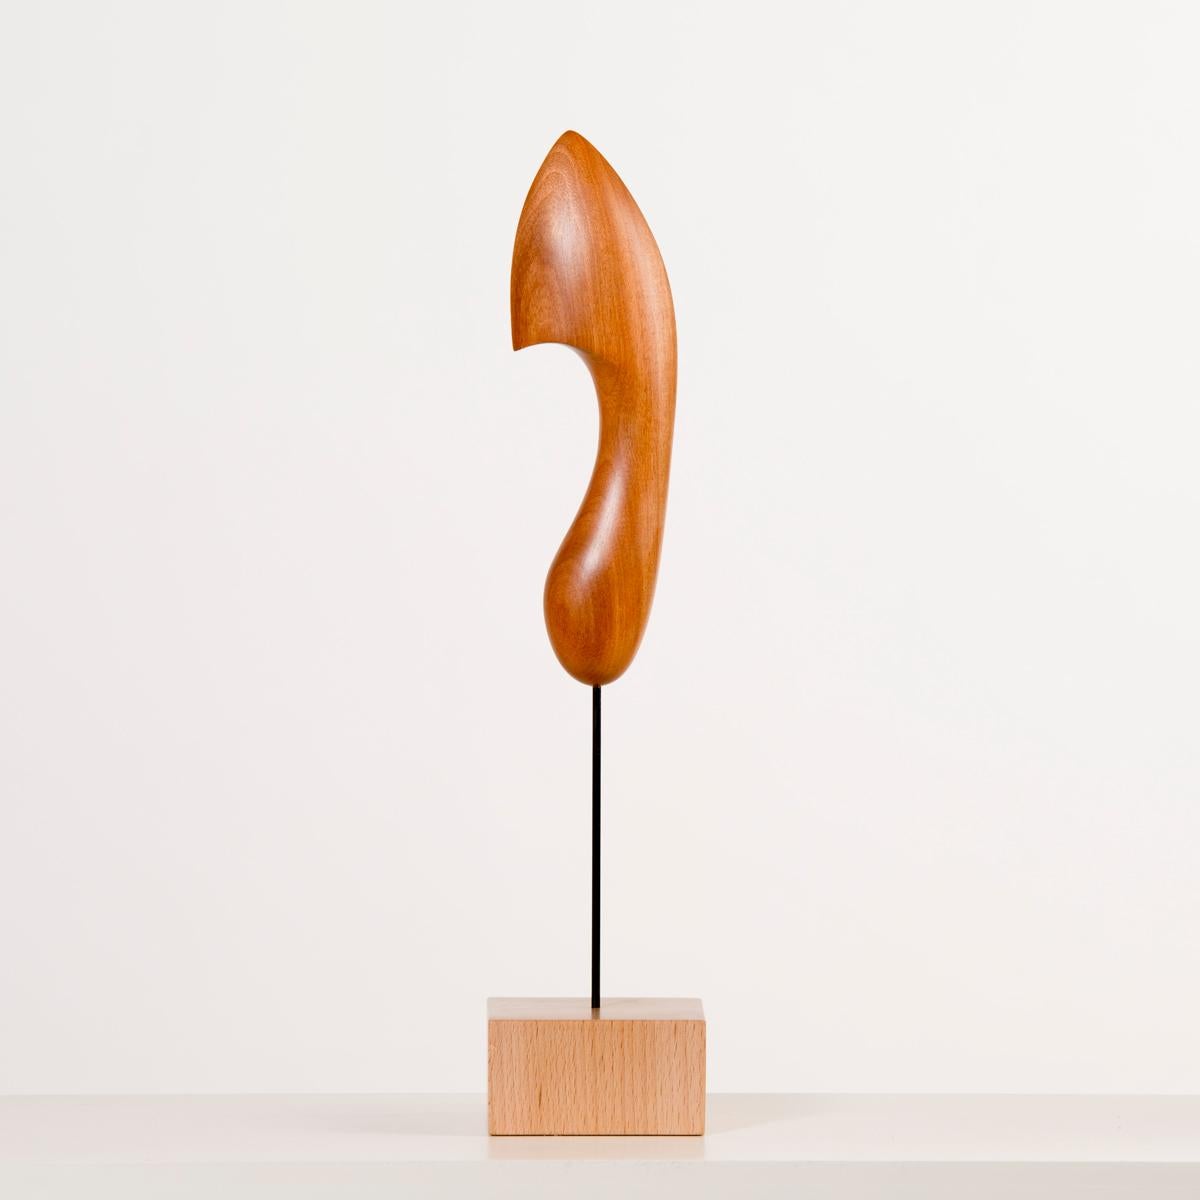 Antoni’s artisanal background gives him the technical quality and ability that highlights his work among others and his artistic approach explores the expressive and aesthetic possibilities of wood. Antoni creates his sculptures in constant research